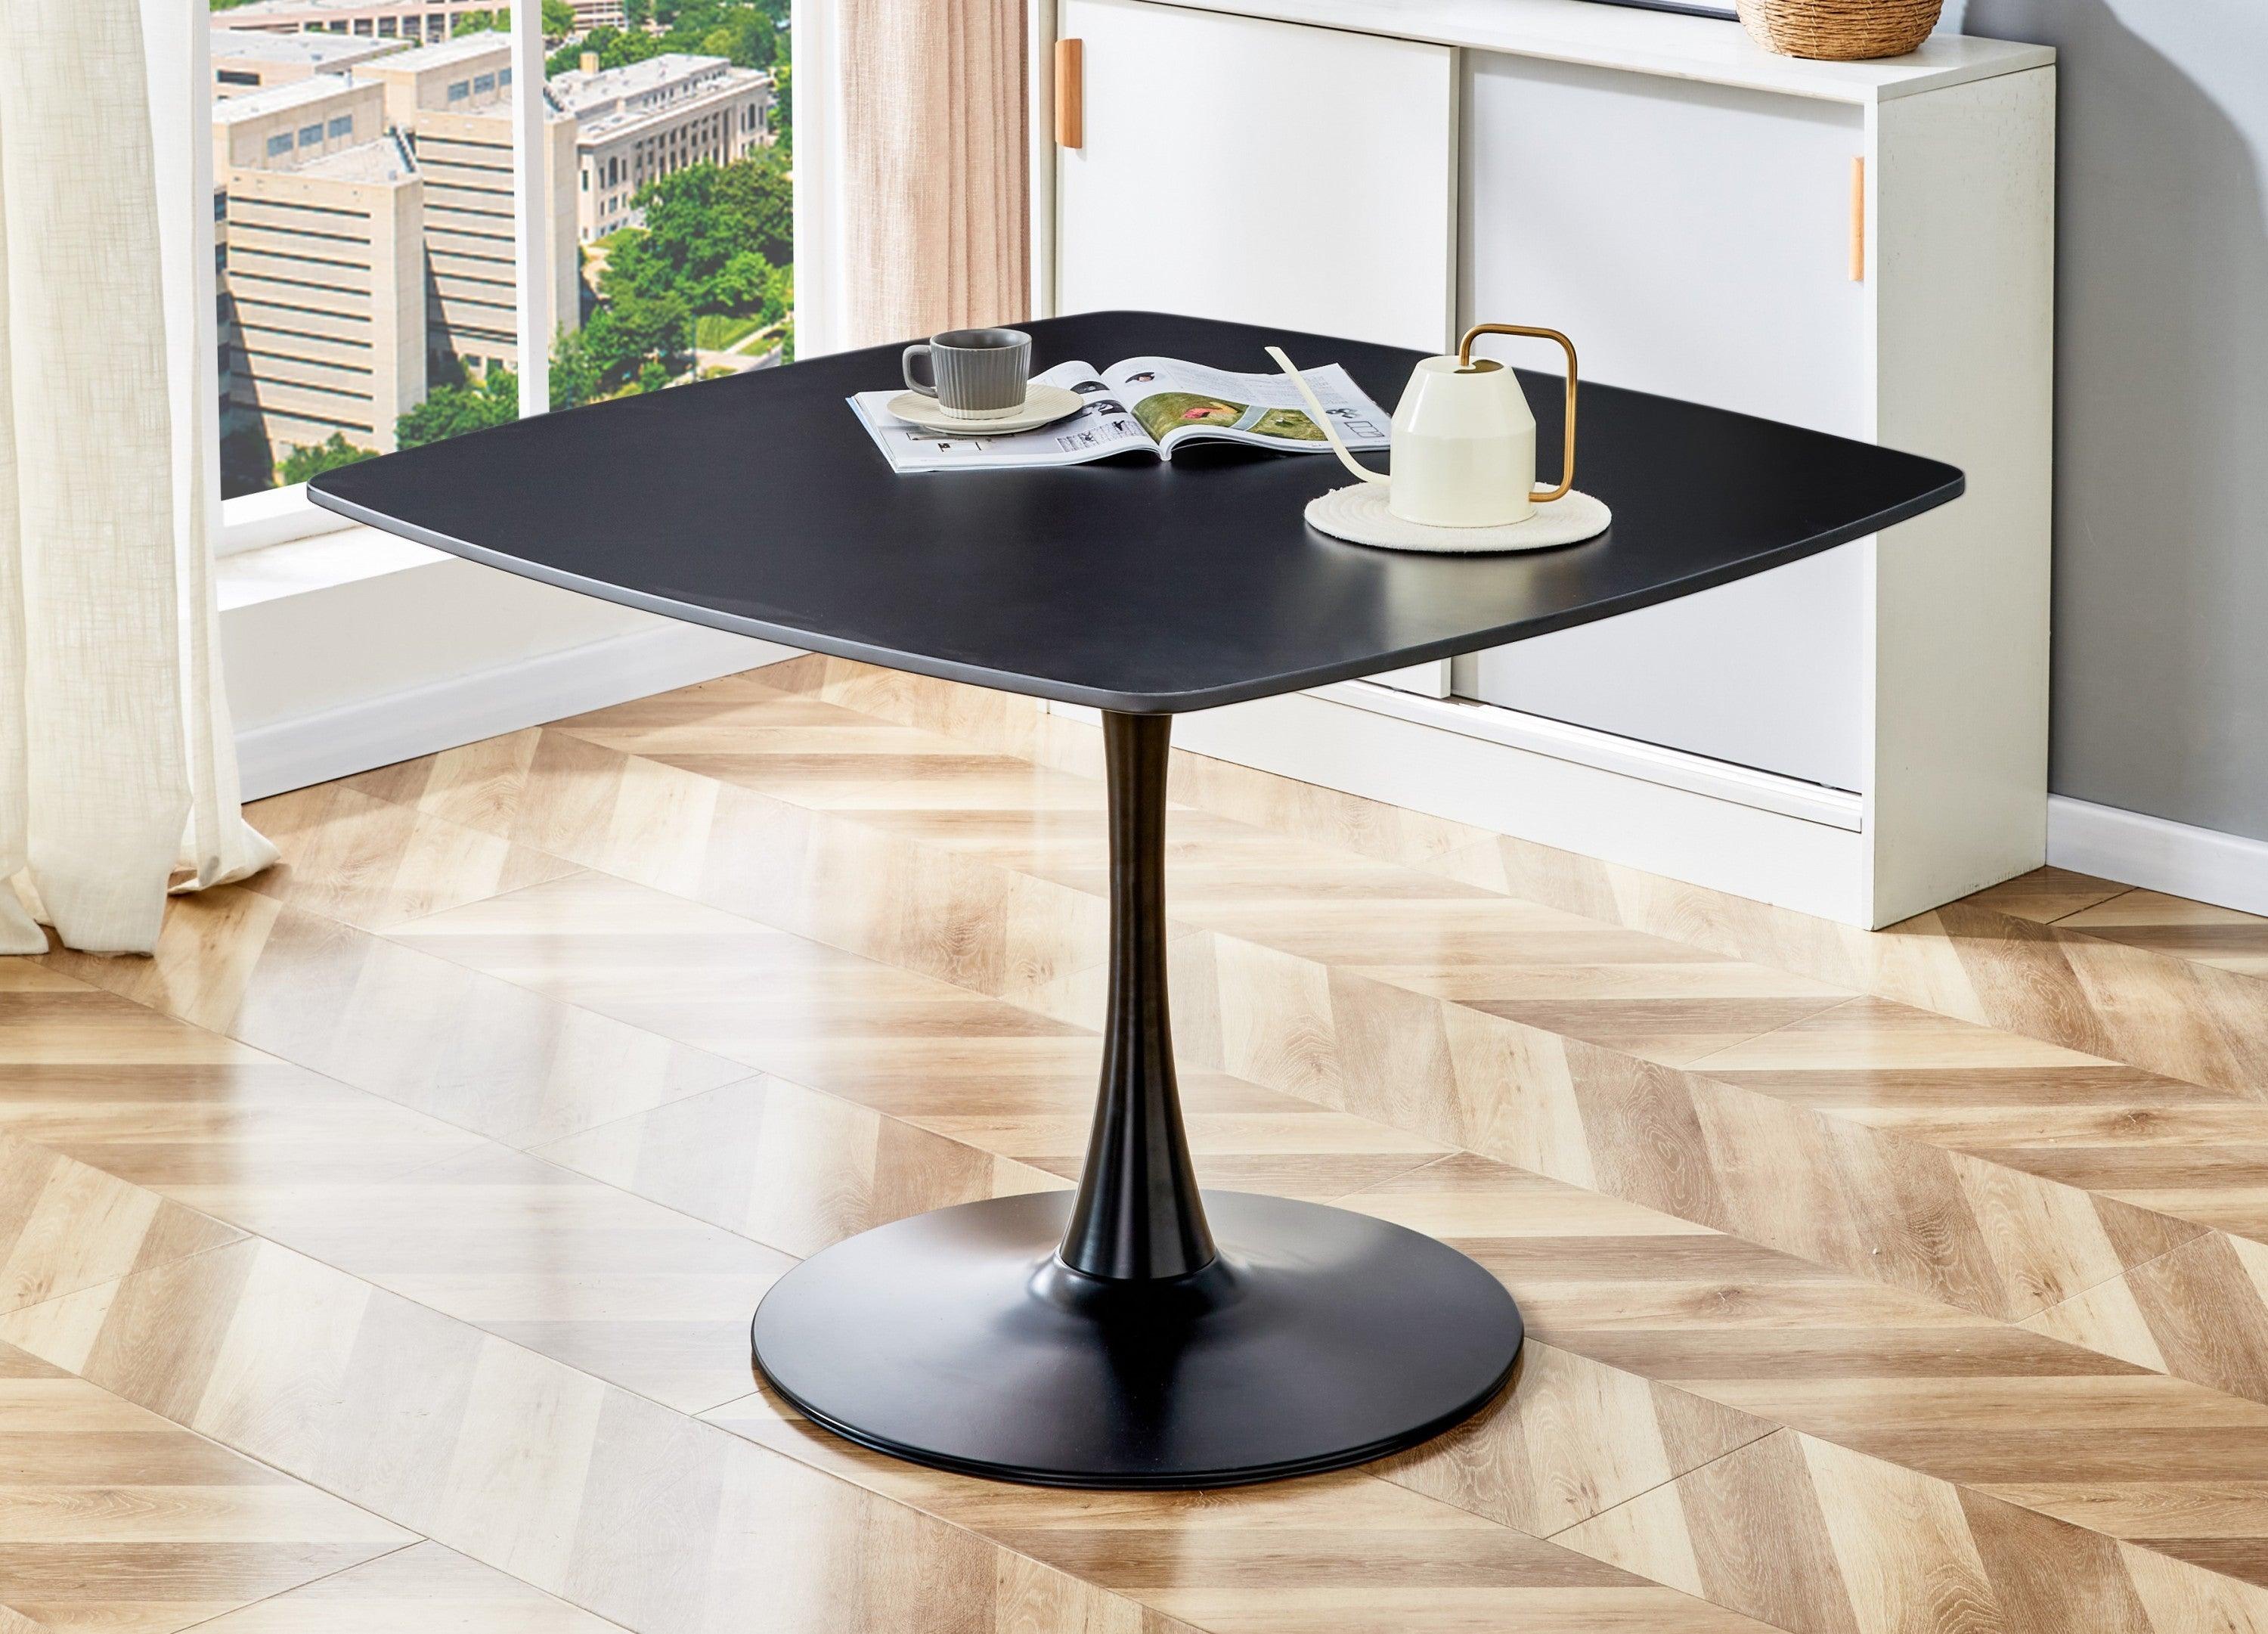 42.1" BLACK Table Mid-century Dining Table for 4-6 people With Round Mdf Table Top, Pedestal Dining Table, End Table Leisure Coffee Table